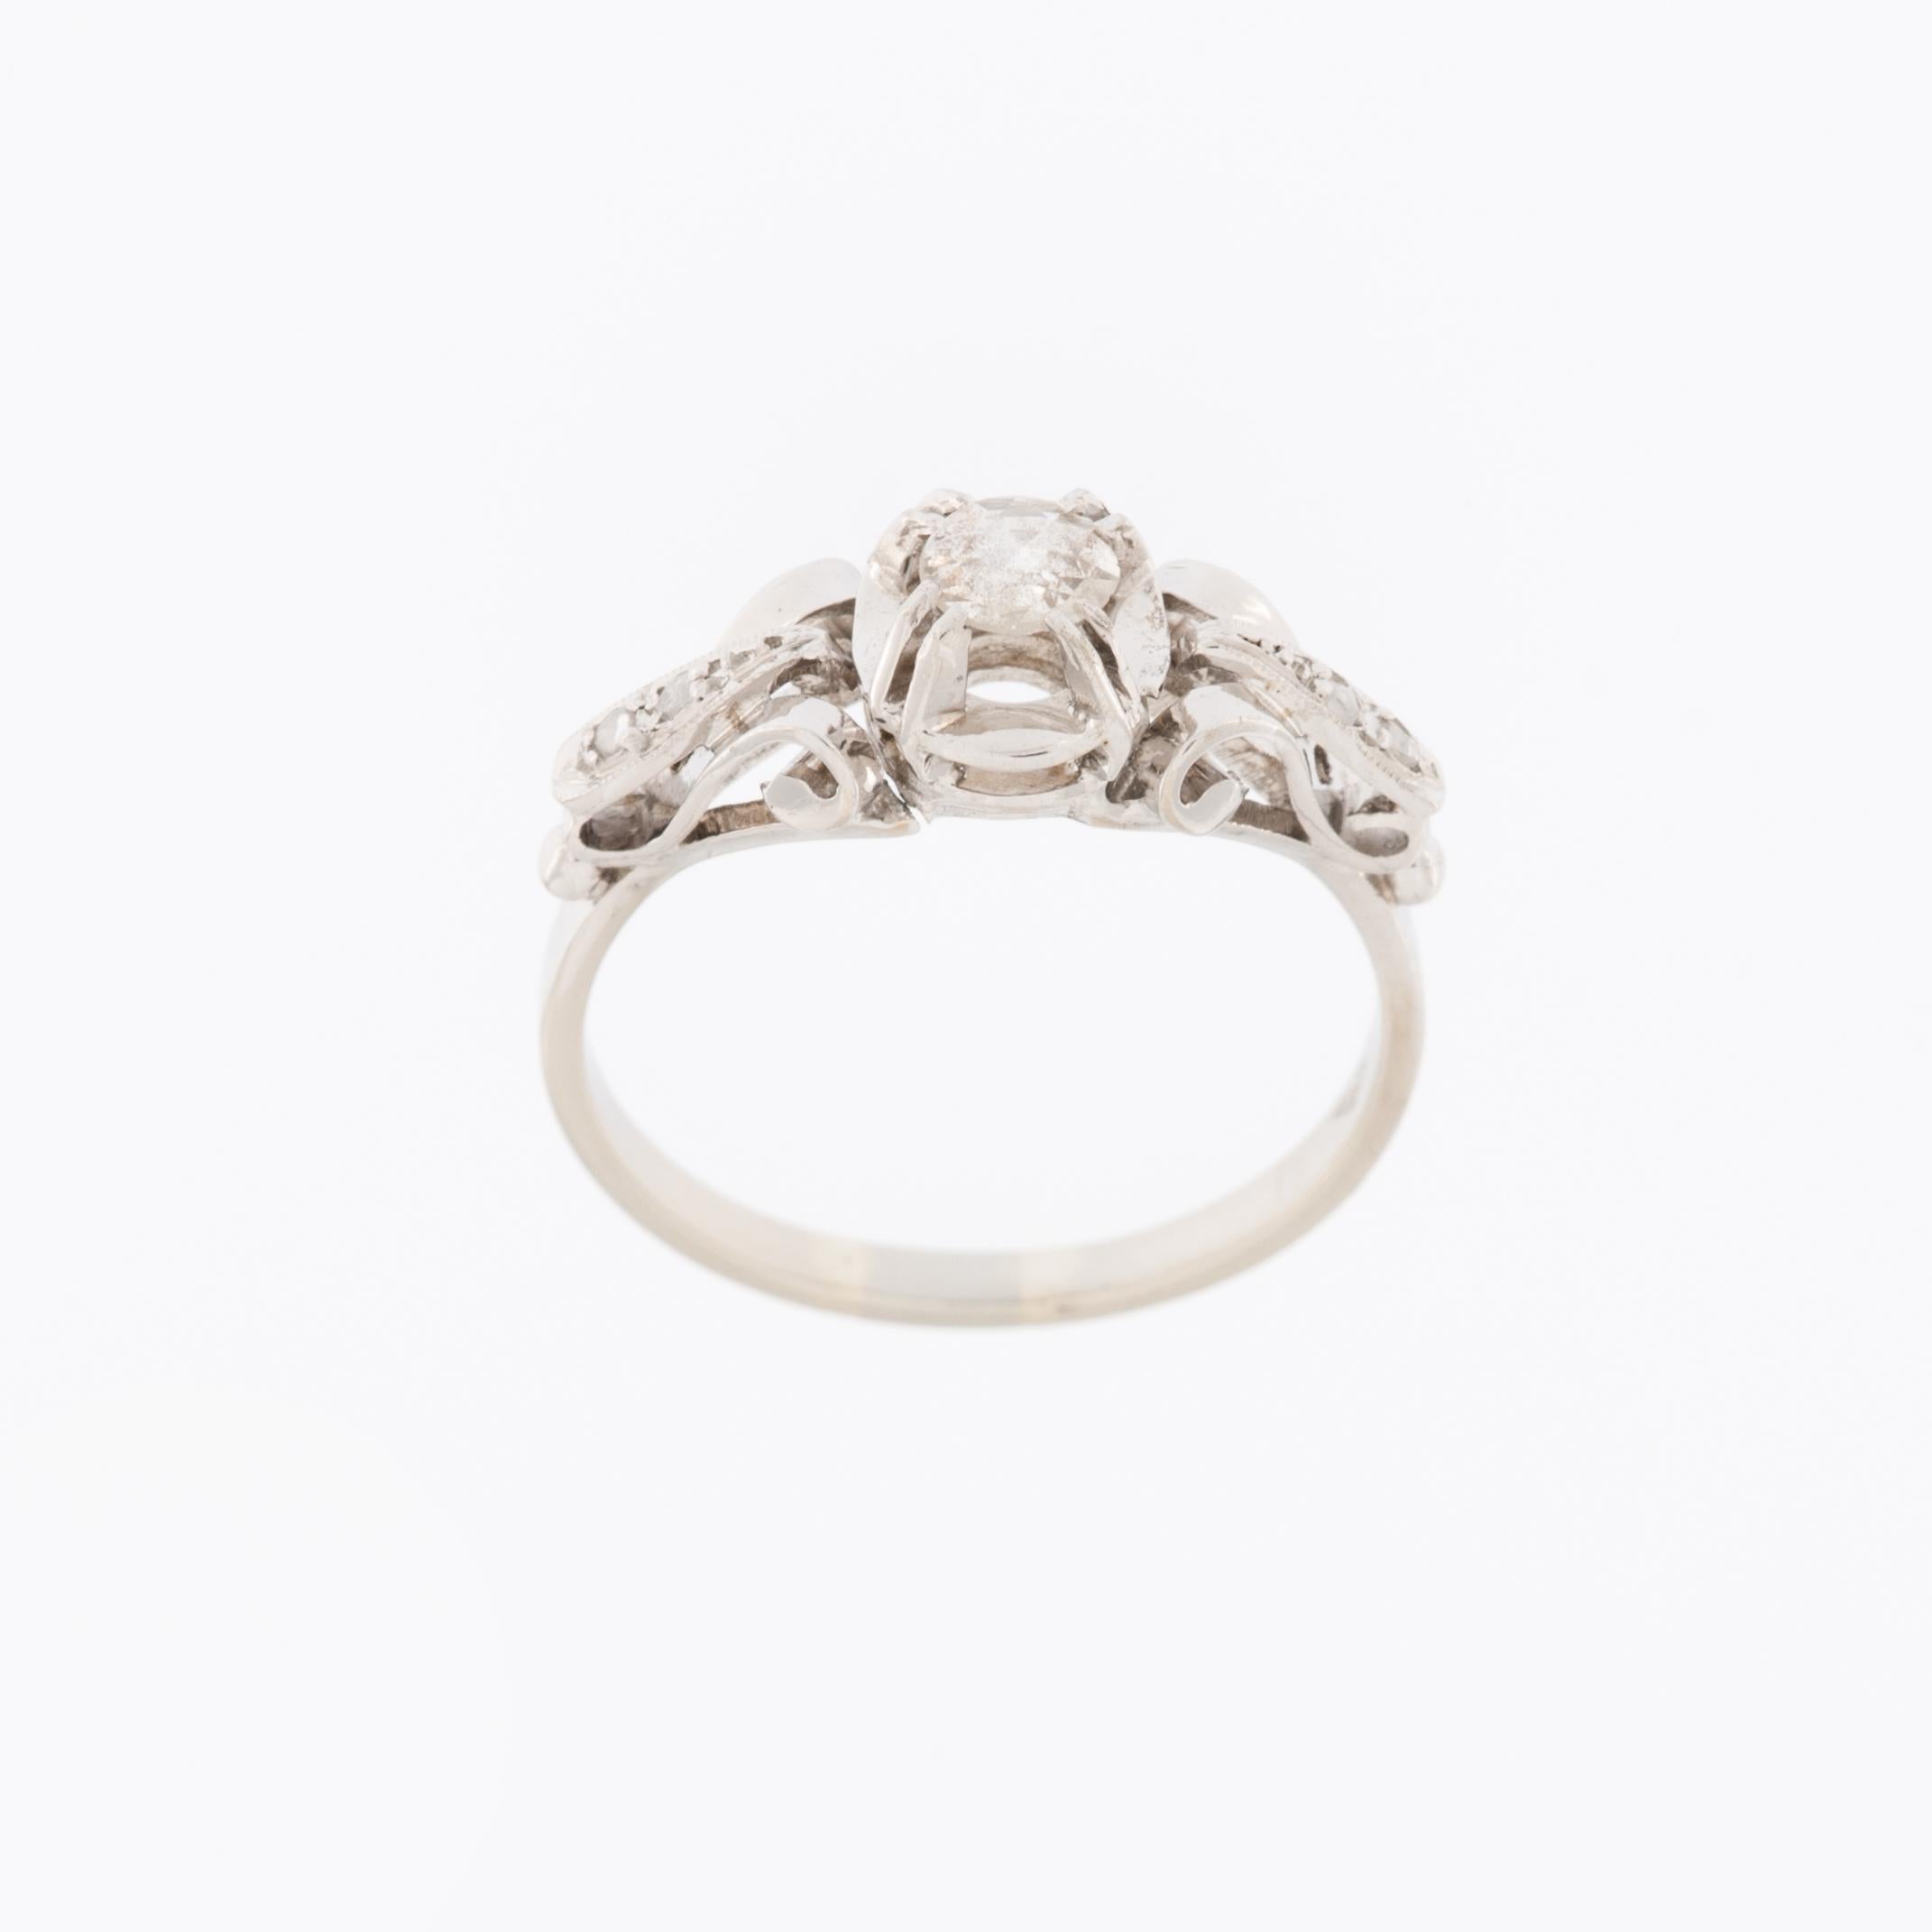 The Old Cut Diamonds 18kt White Gold Italian Engagement Ring is a stunning piece of jewelry that exudes timeless elegance and sophistication. The term 